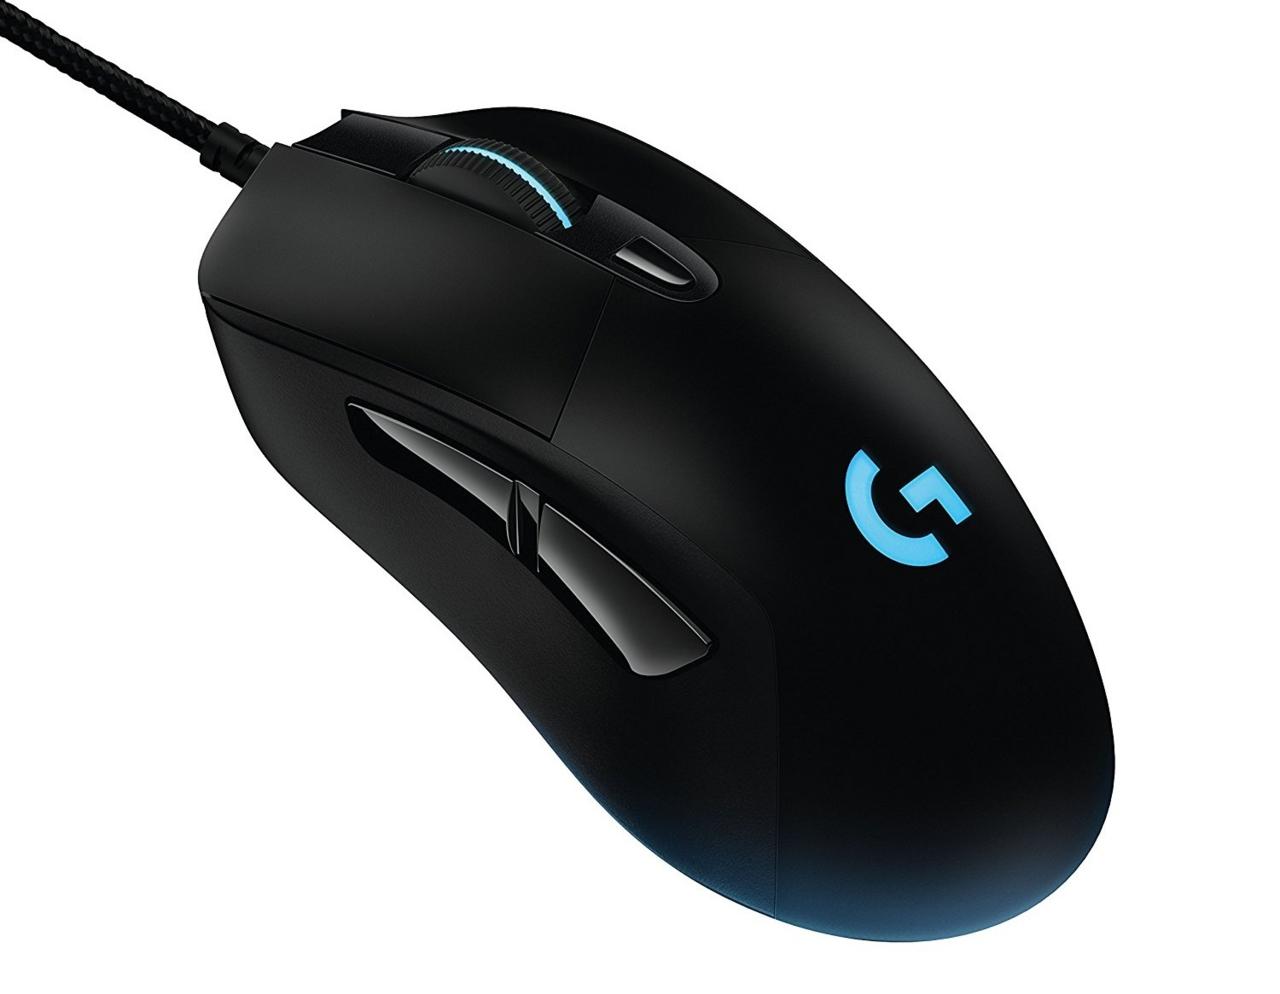 Logitech G403 Wired Mouse - $49